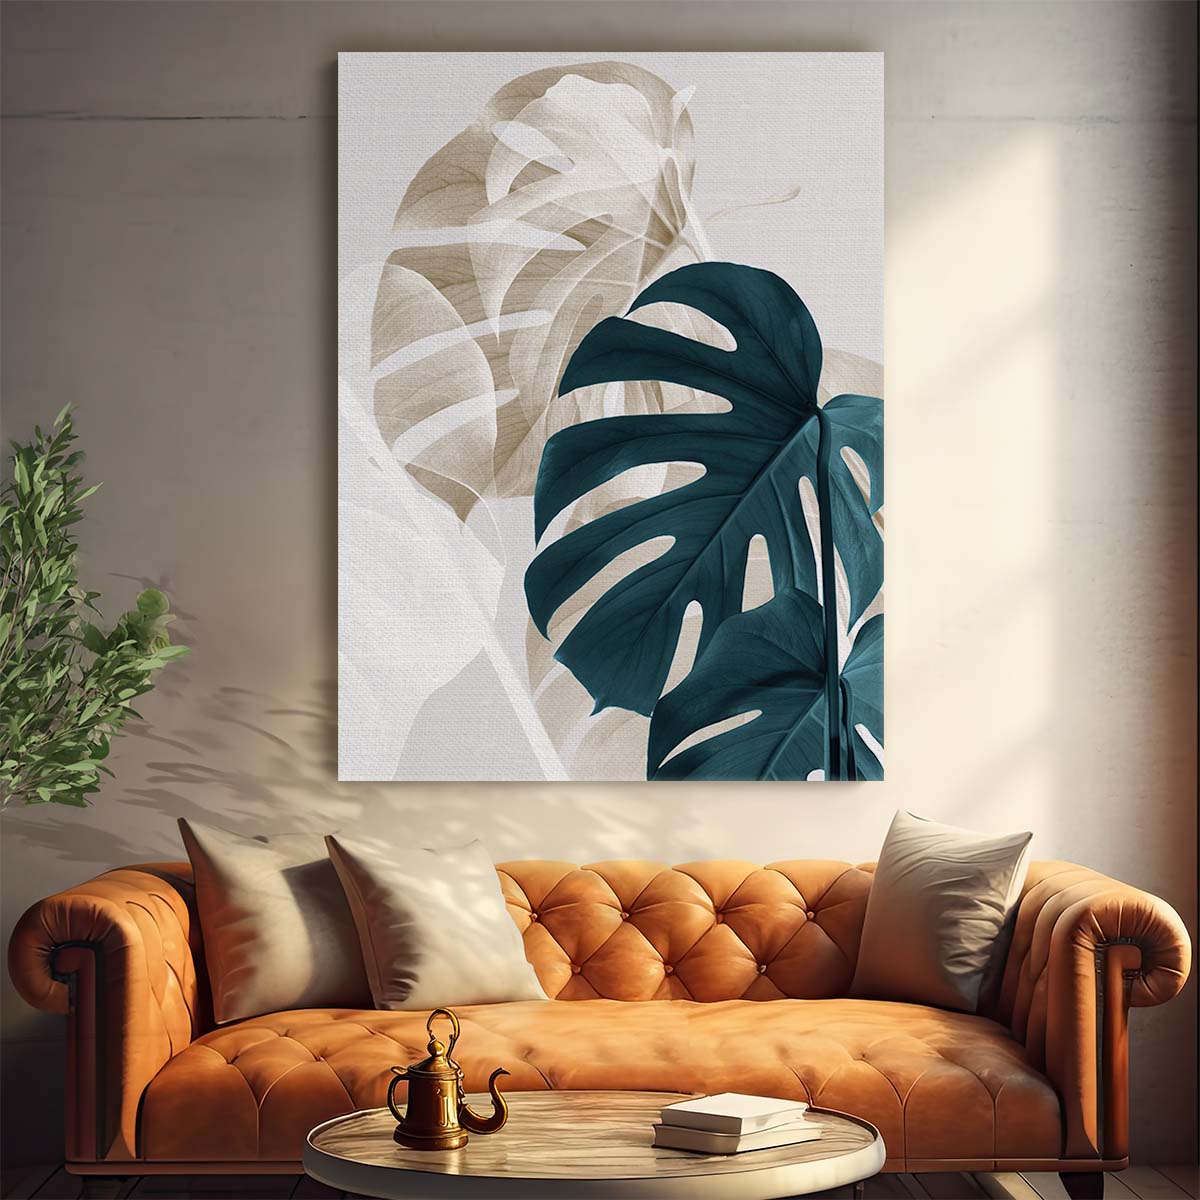 Botanical Monstera Leaves Photography - Creative Double Exposure Wall Art by Luxuriance Designs, made in USA